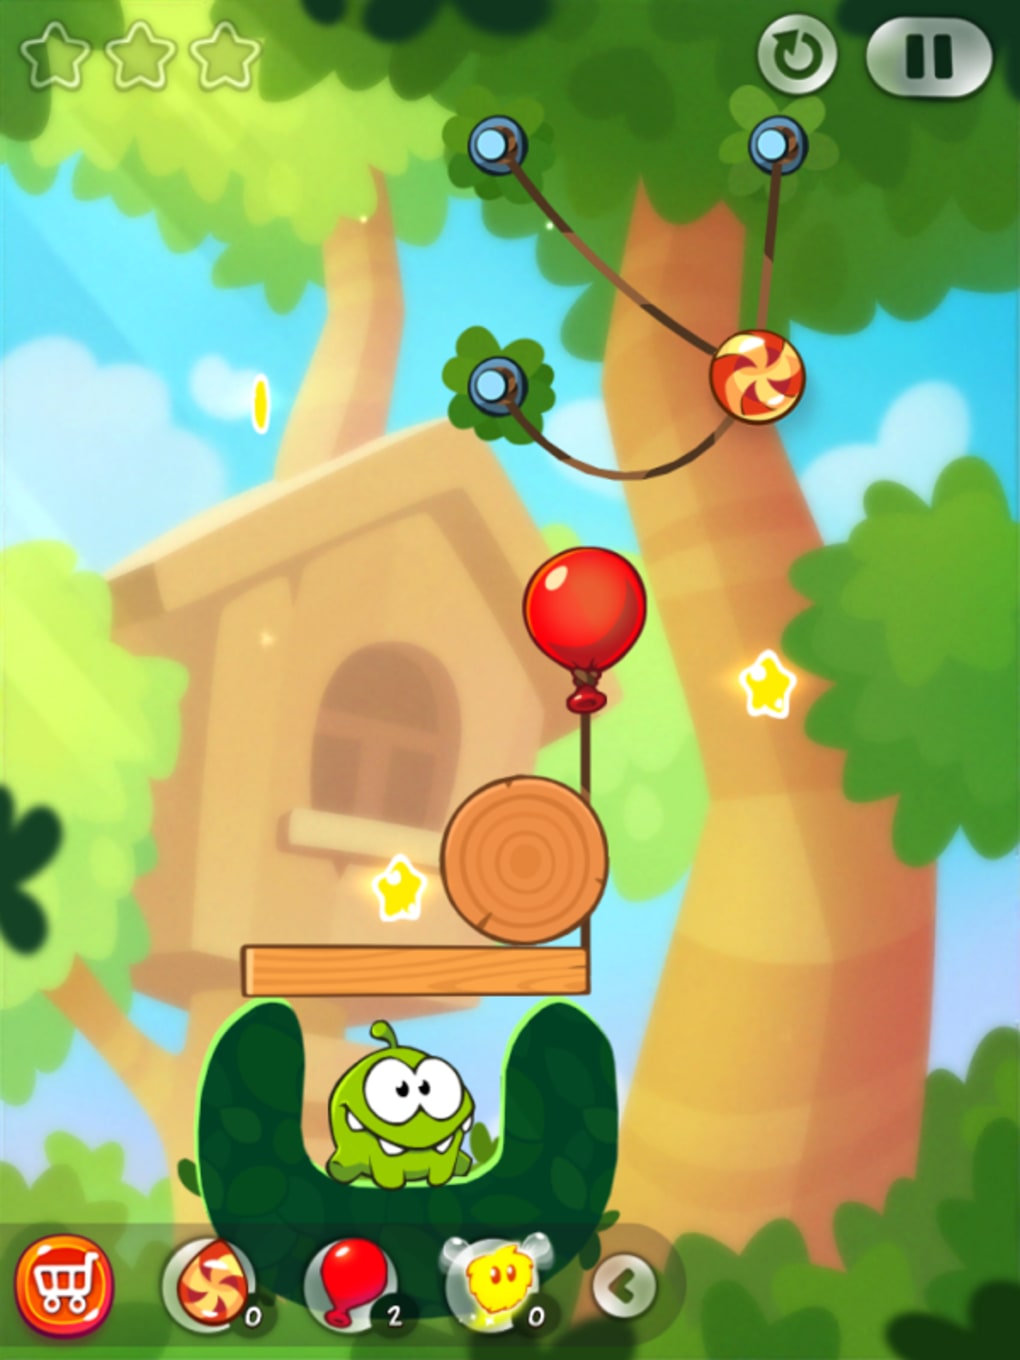 Cut the Rope 2 para iPhone - Download